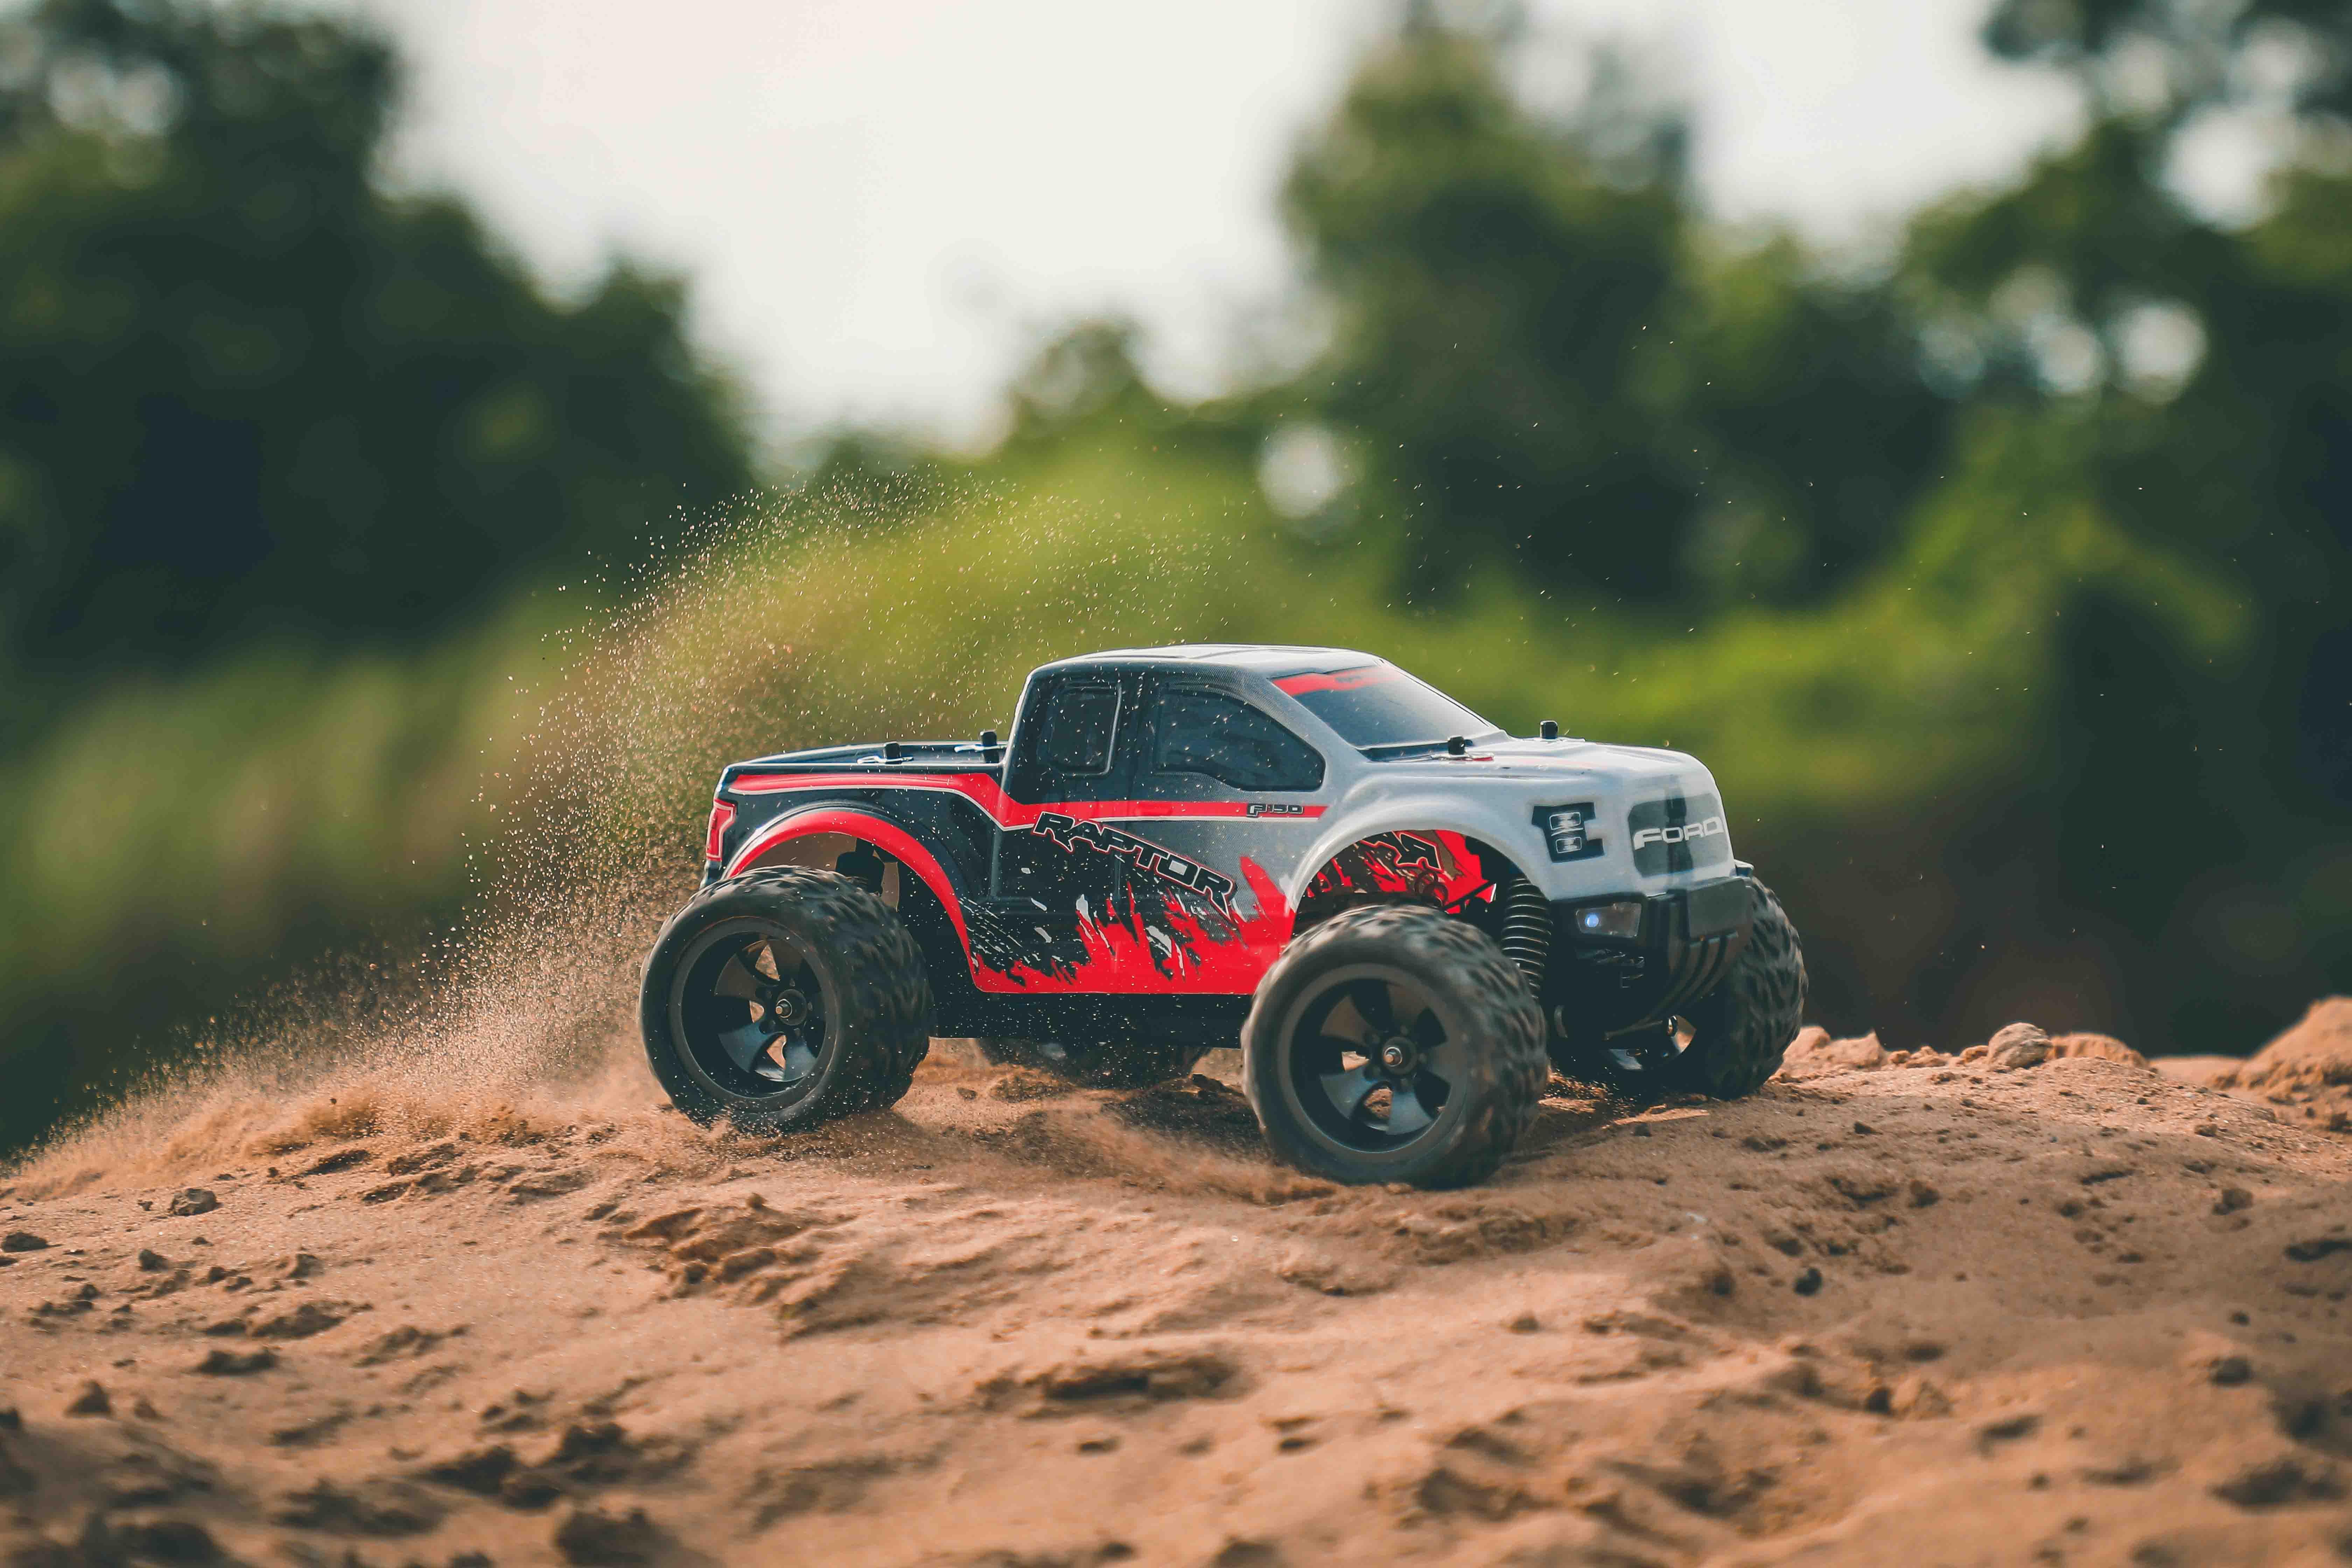 Remote Control 4X4: All-rounded performance and endless customization options make remote control 4x4 cars the top choice for hobbyists.